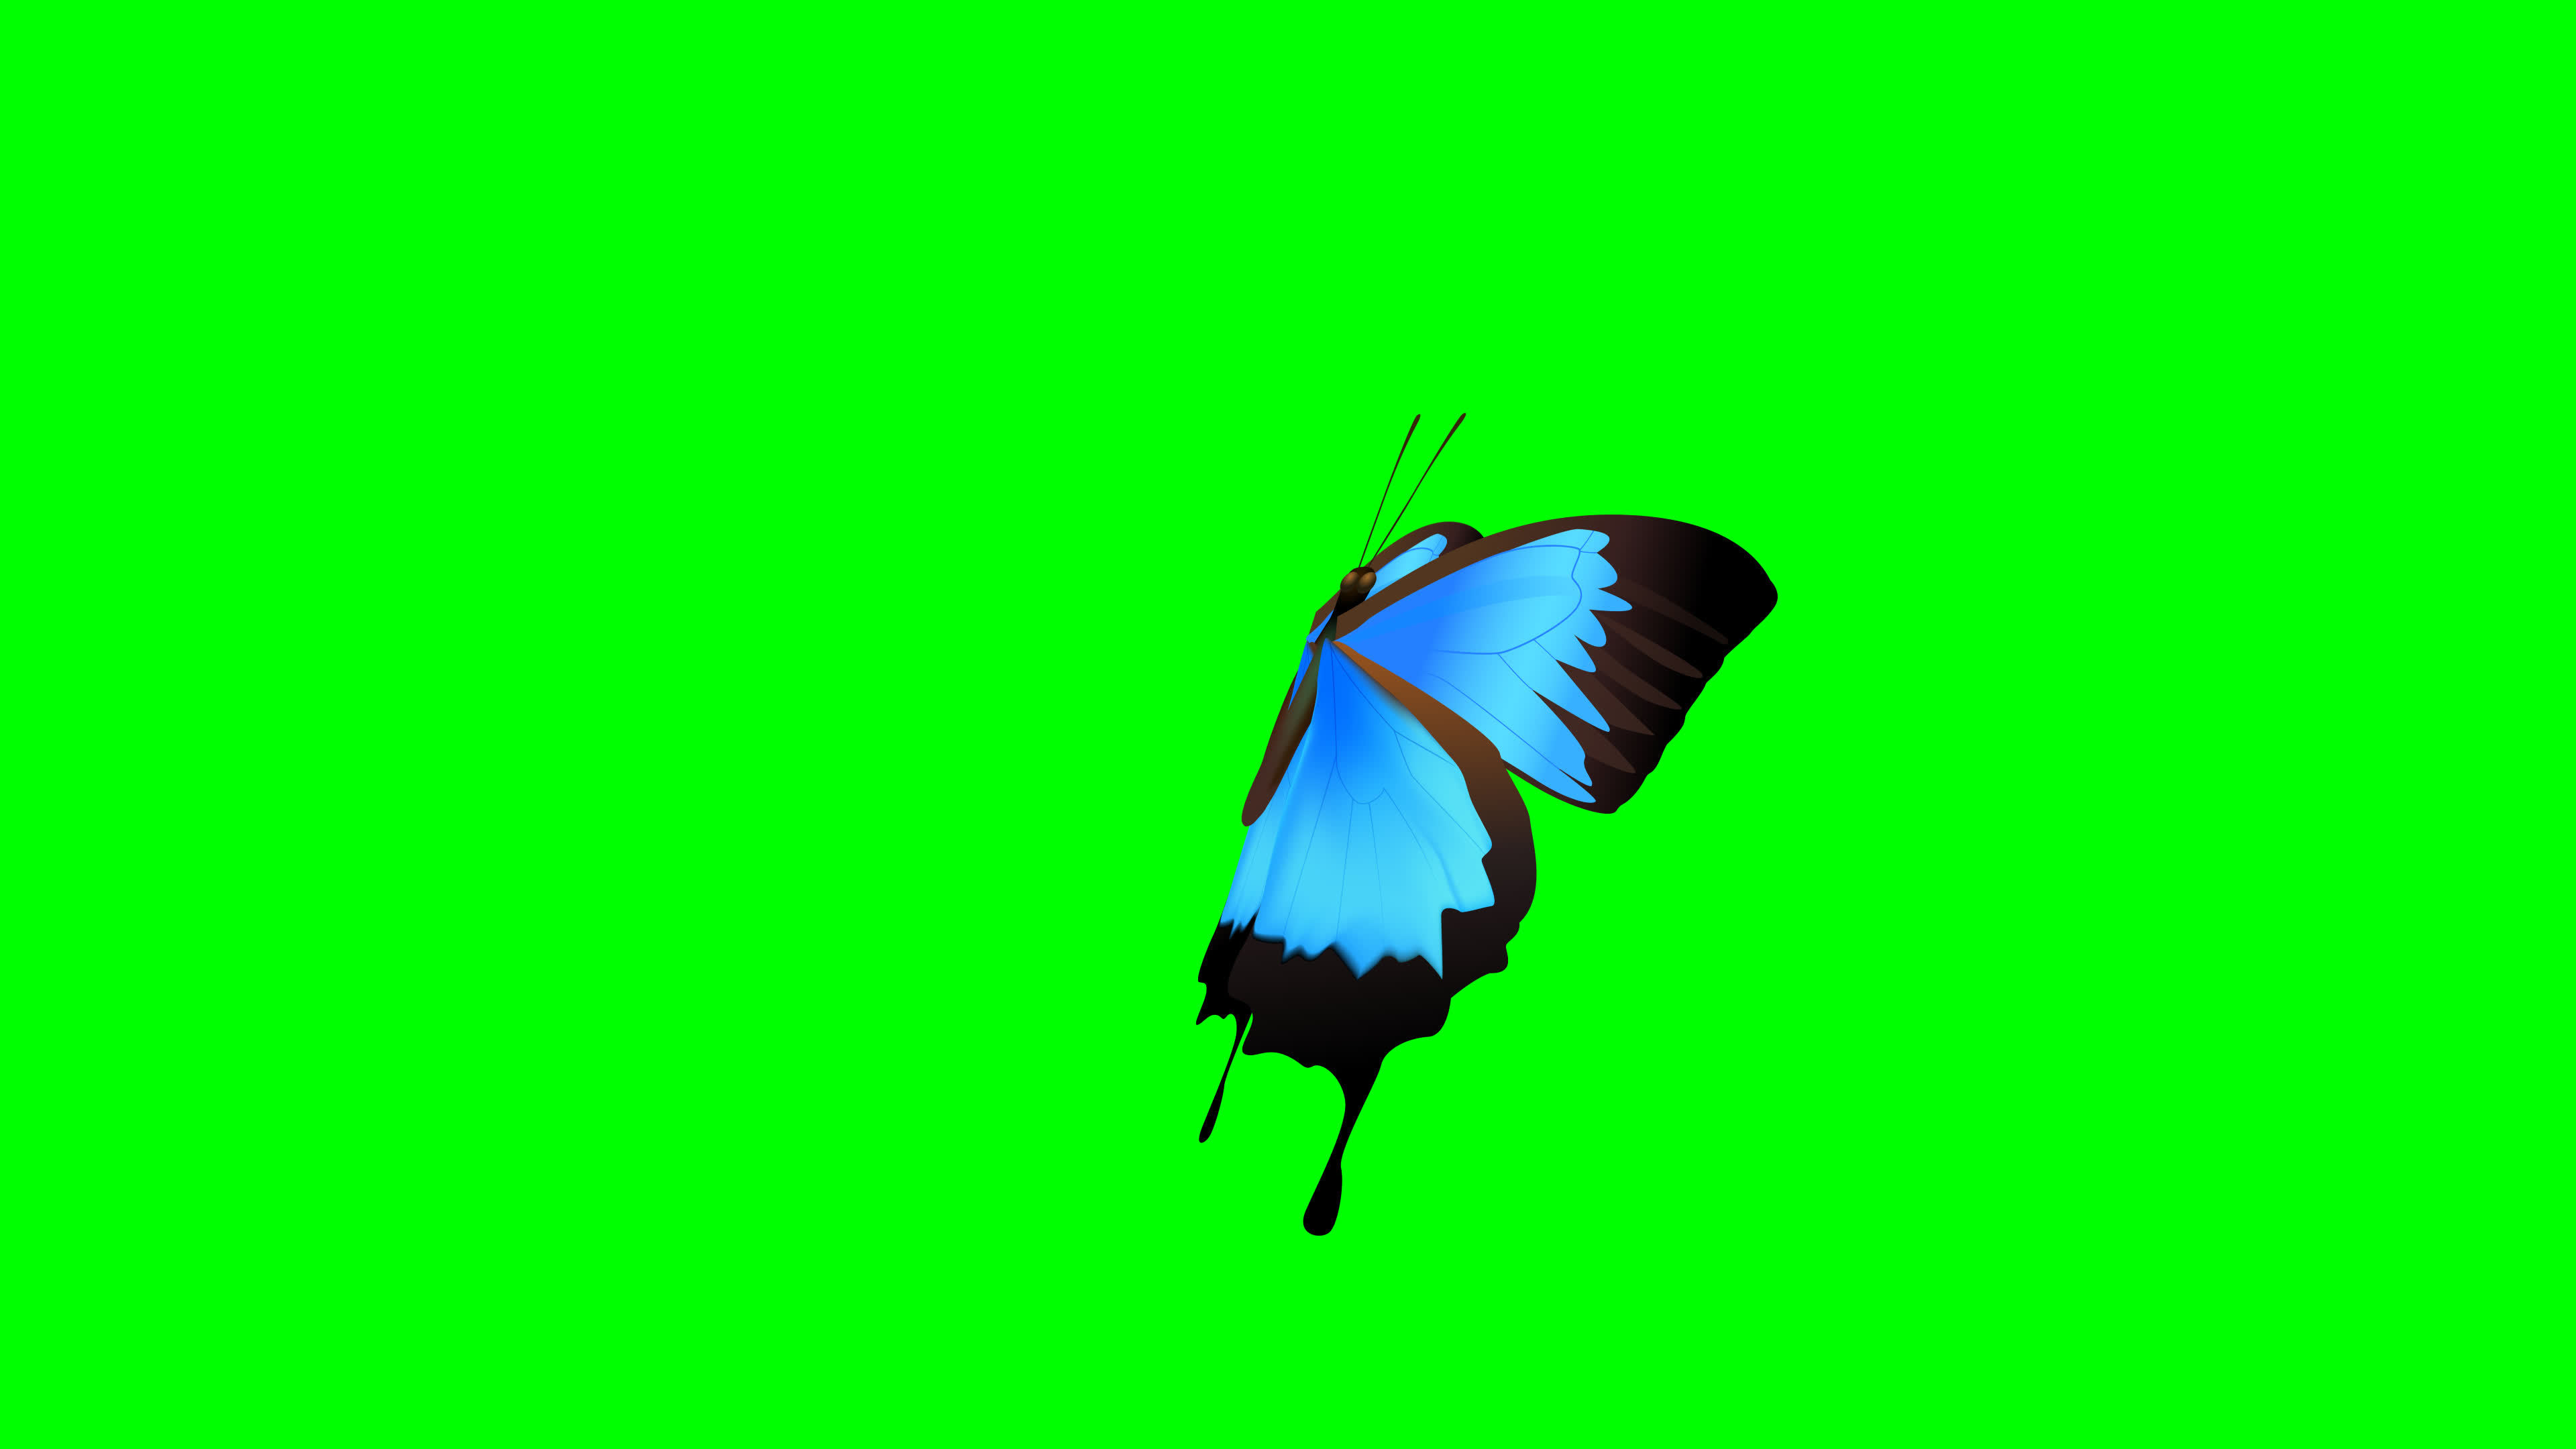 Single Butterfly Animation Green Screen 18904525 Stock Video at Vecteezy